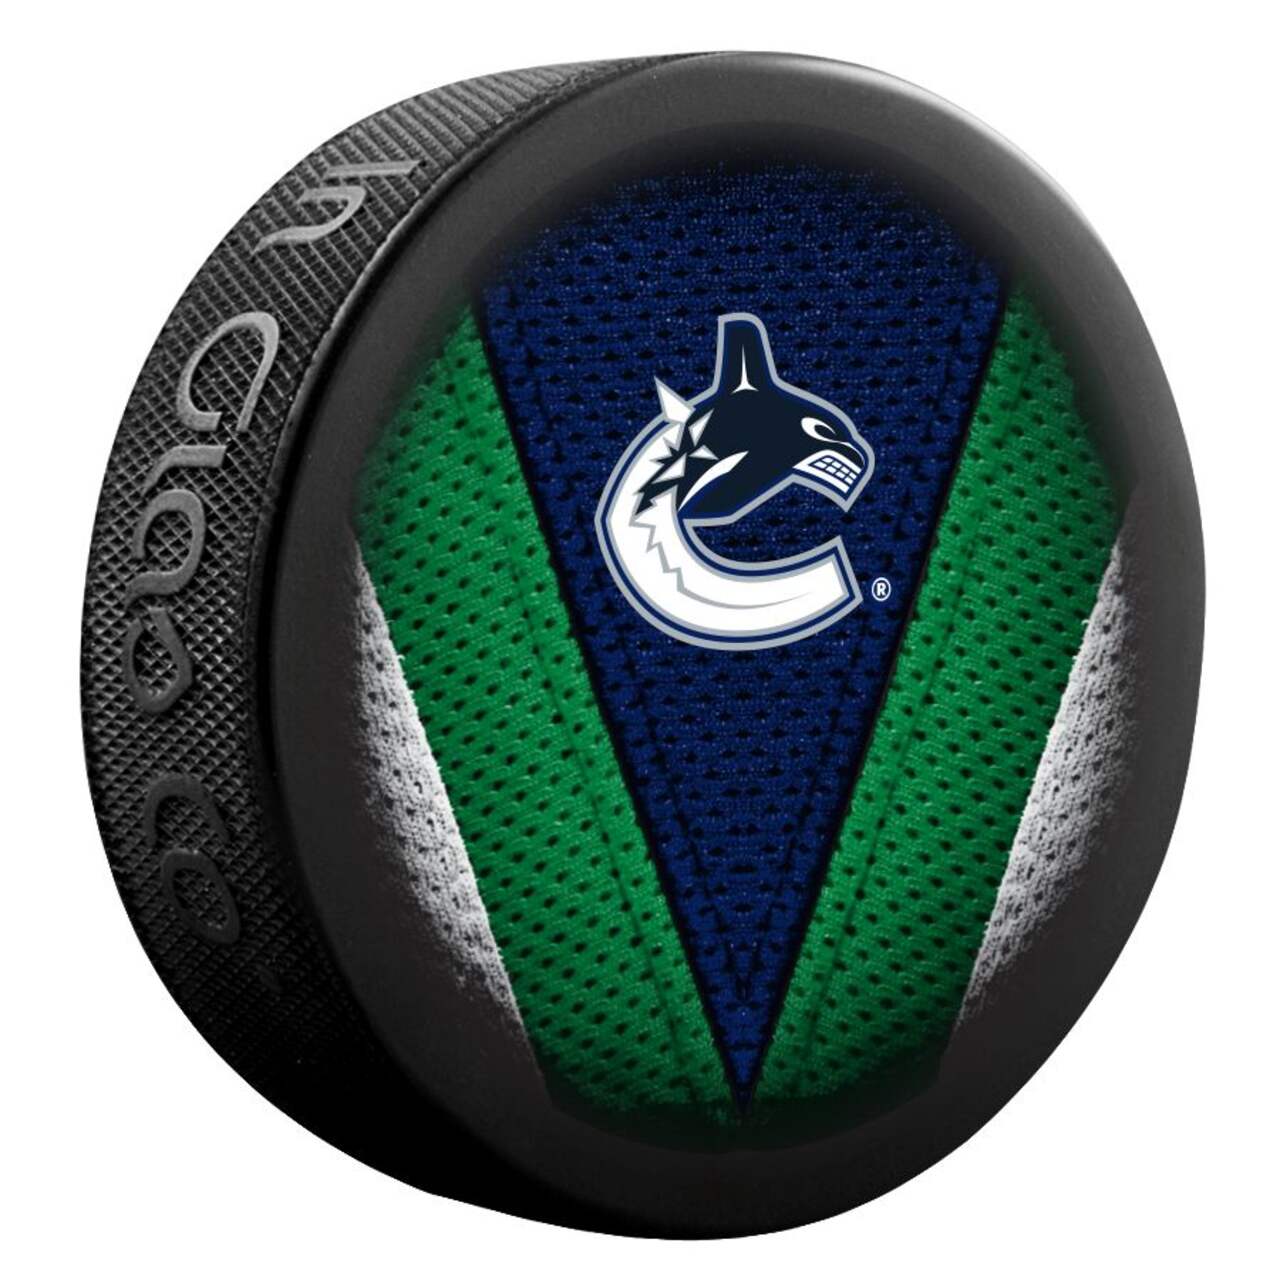 NHL® Vancouver Canucks Official Replica Hockey Puck